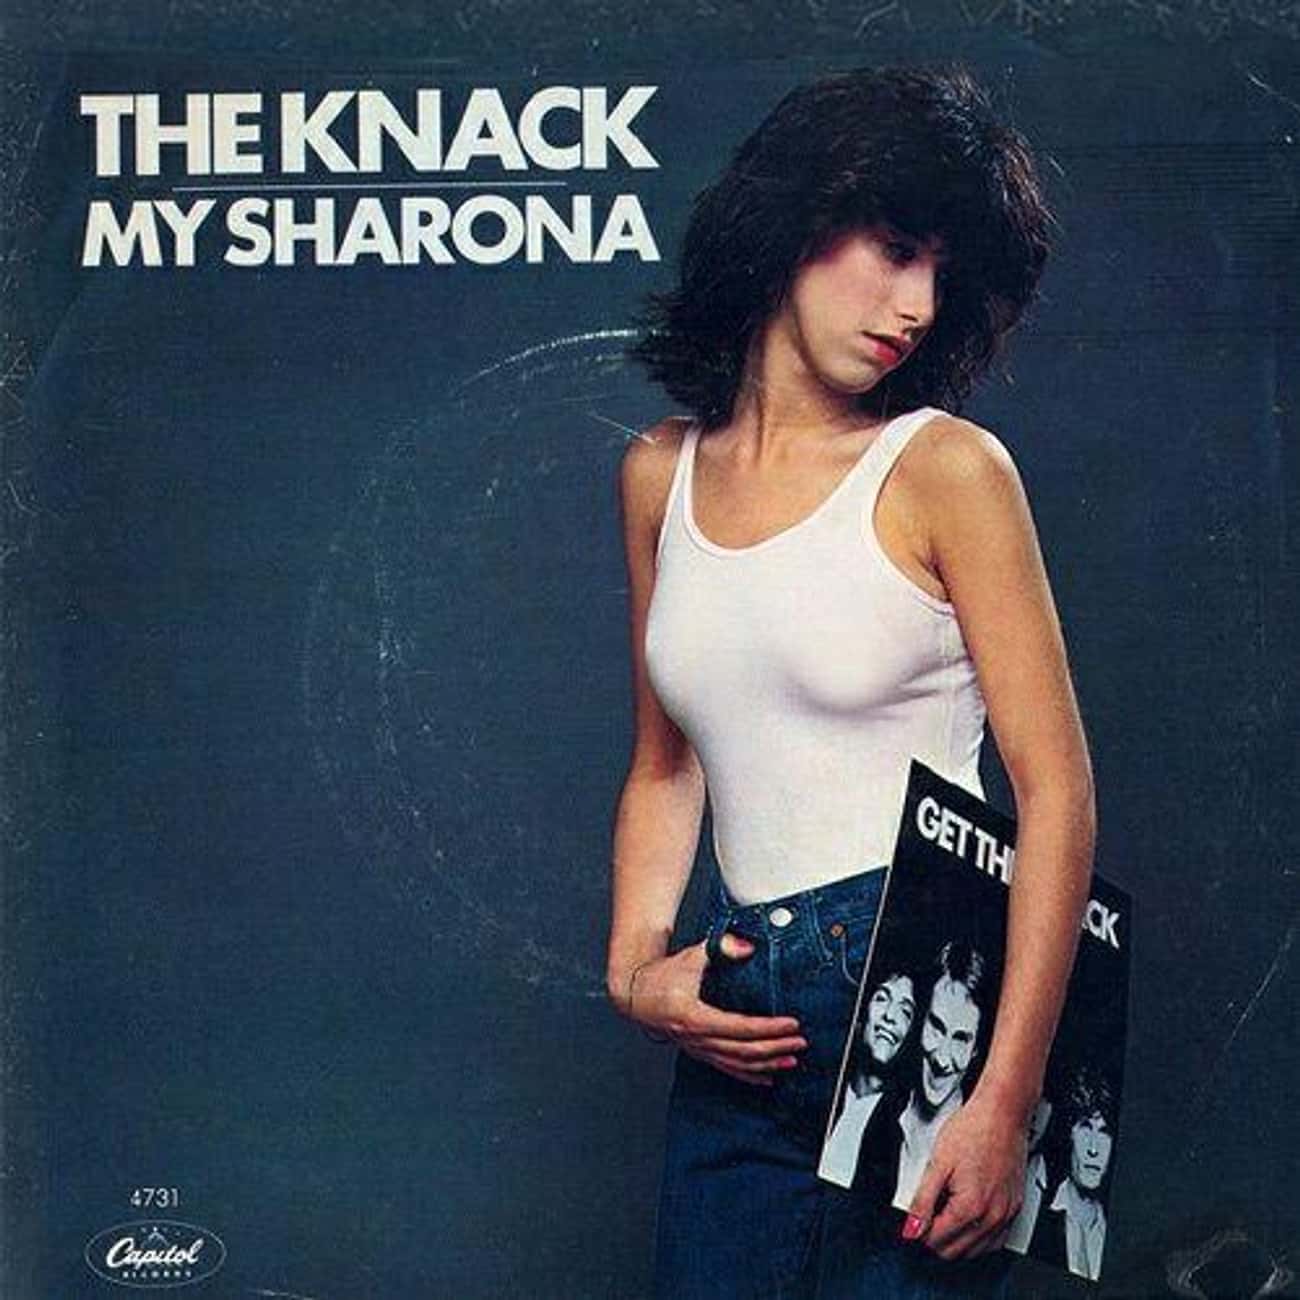 Sharona from 'My Sharona' Is Now A Real Estate Agent Who Uses The Song To Her Advantage